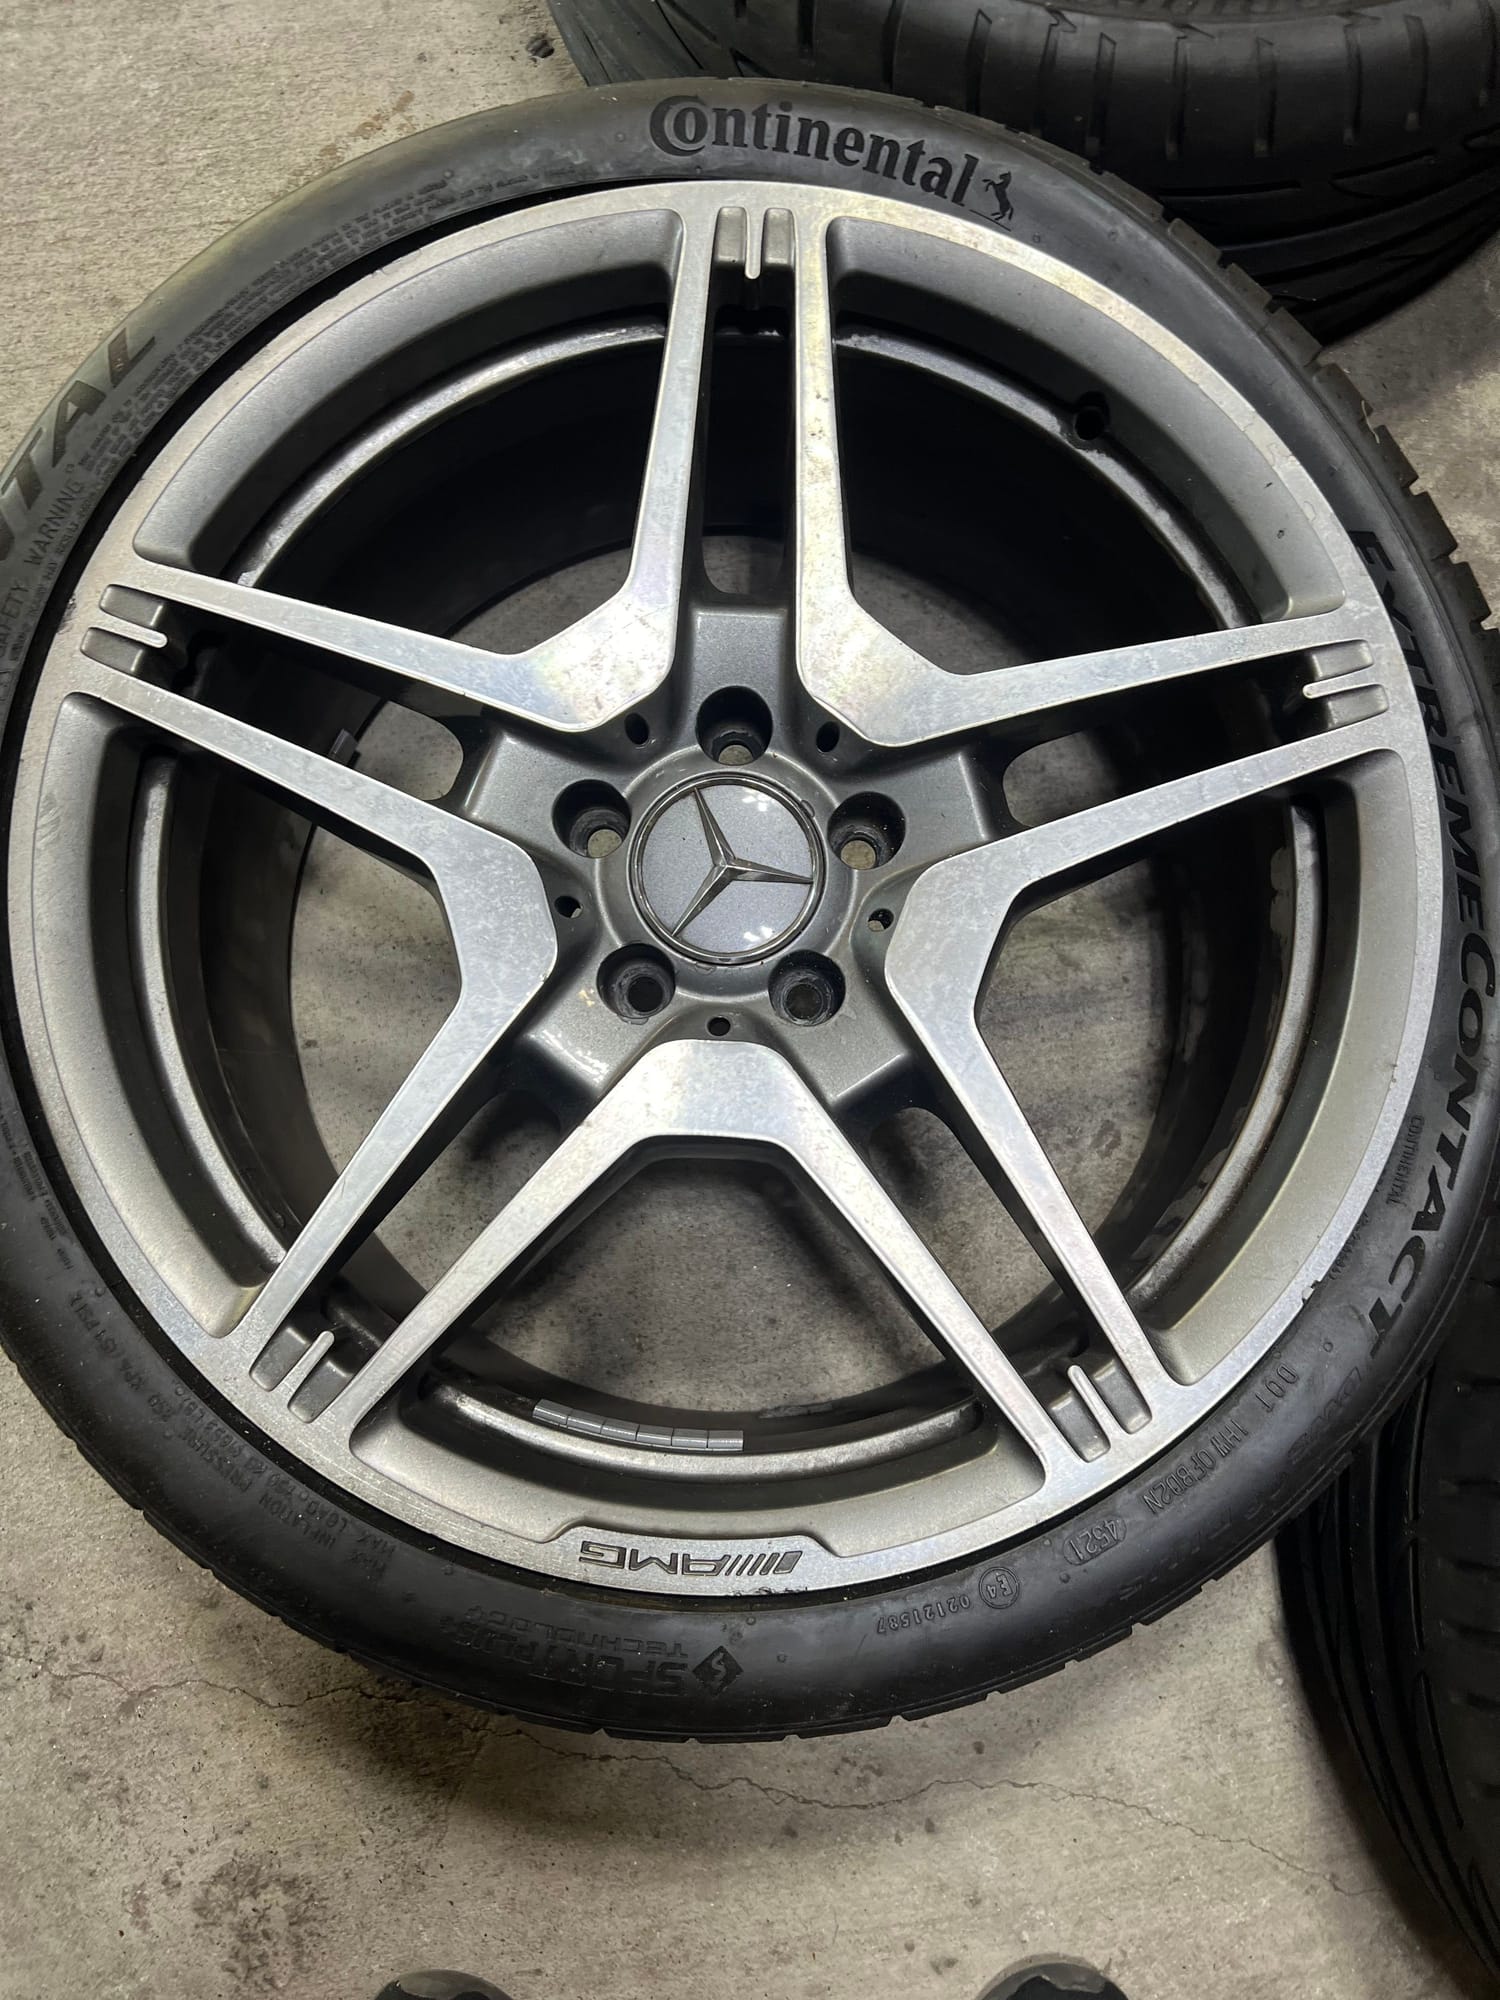 Wheels and Tires/Axles - OEM W212 E63 19 inch Wheels - Used - 2009 to 2013 Mercedes-Benz E63 AMG - Houston, TX 77080, United States